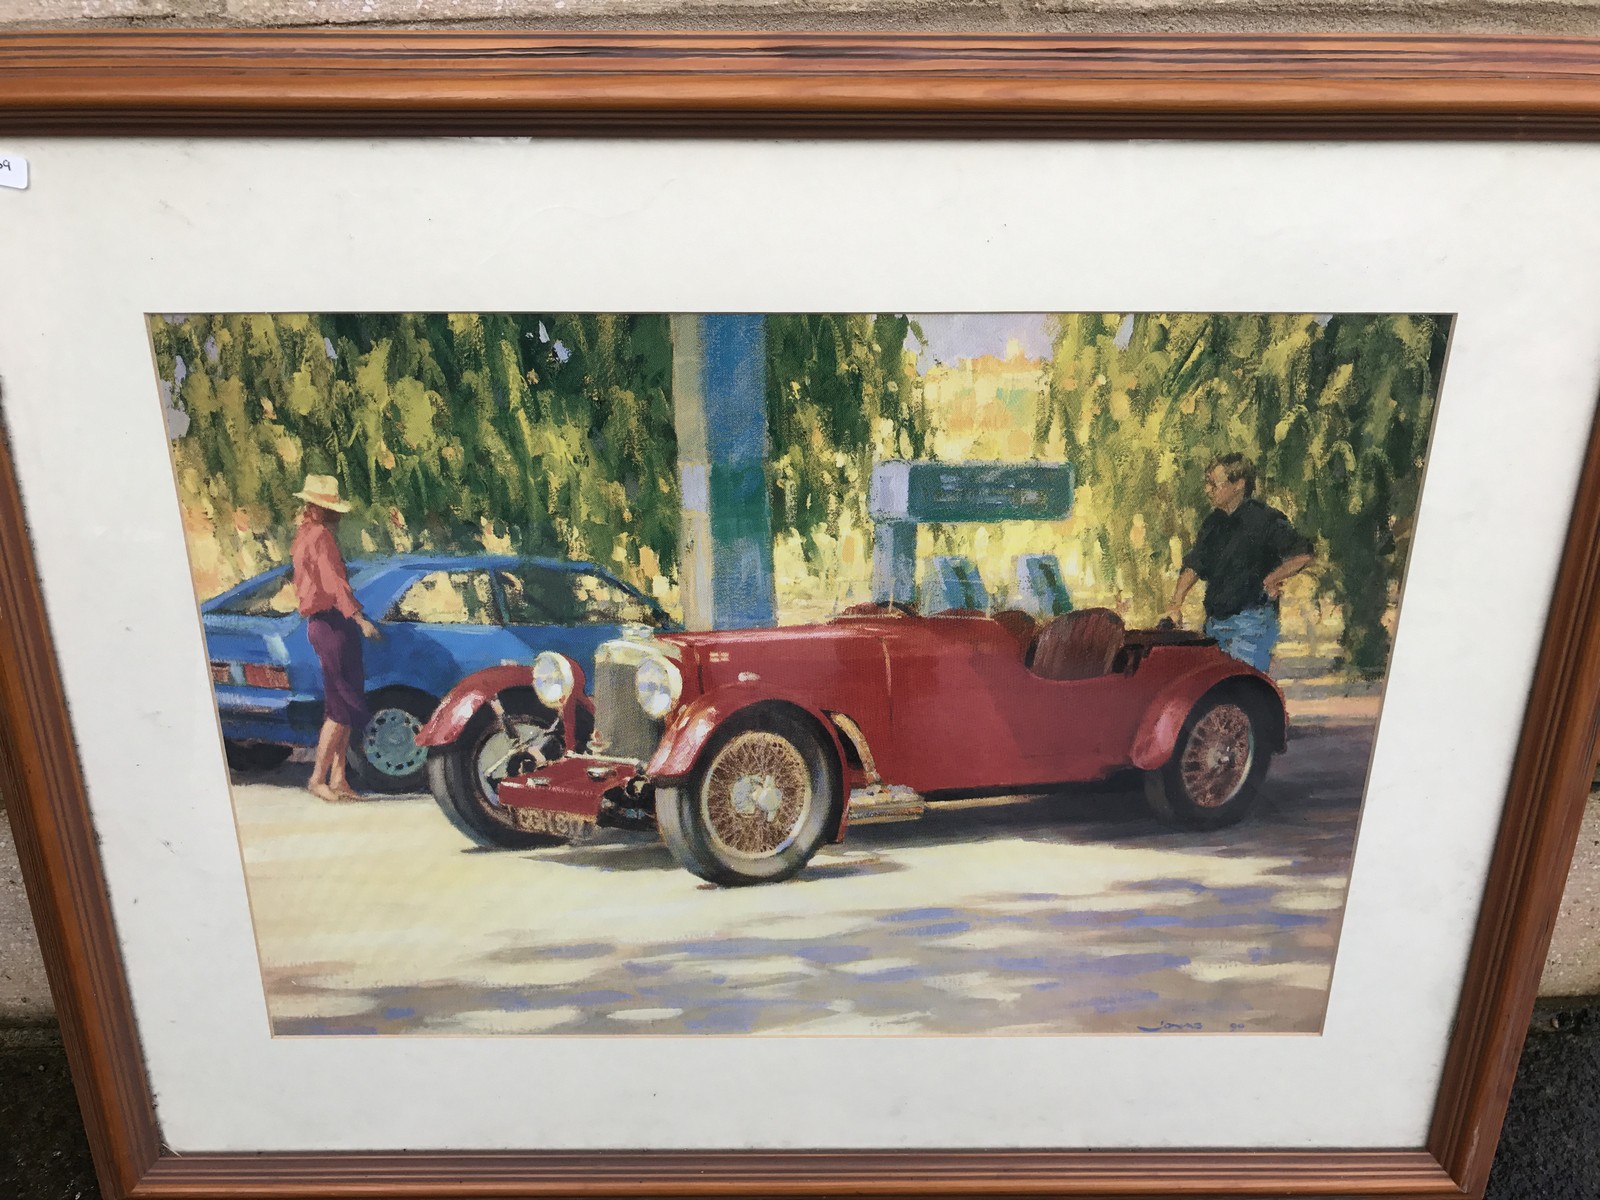 A framed and glazed print of a pre-war Aston Martin short chassis after a painting titled